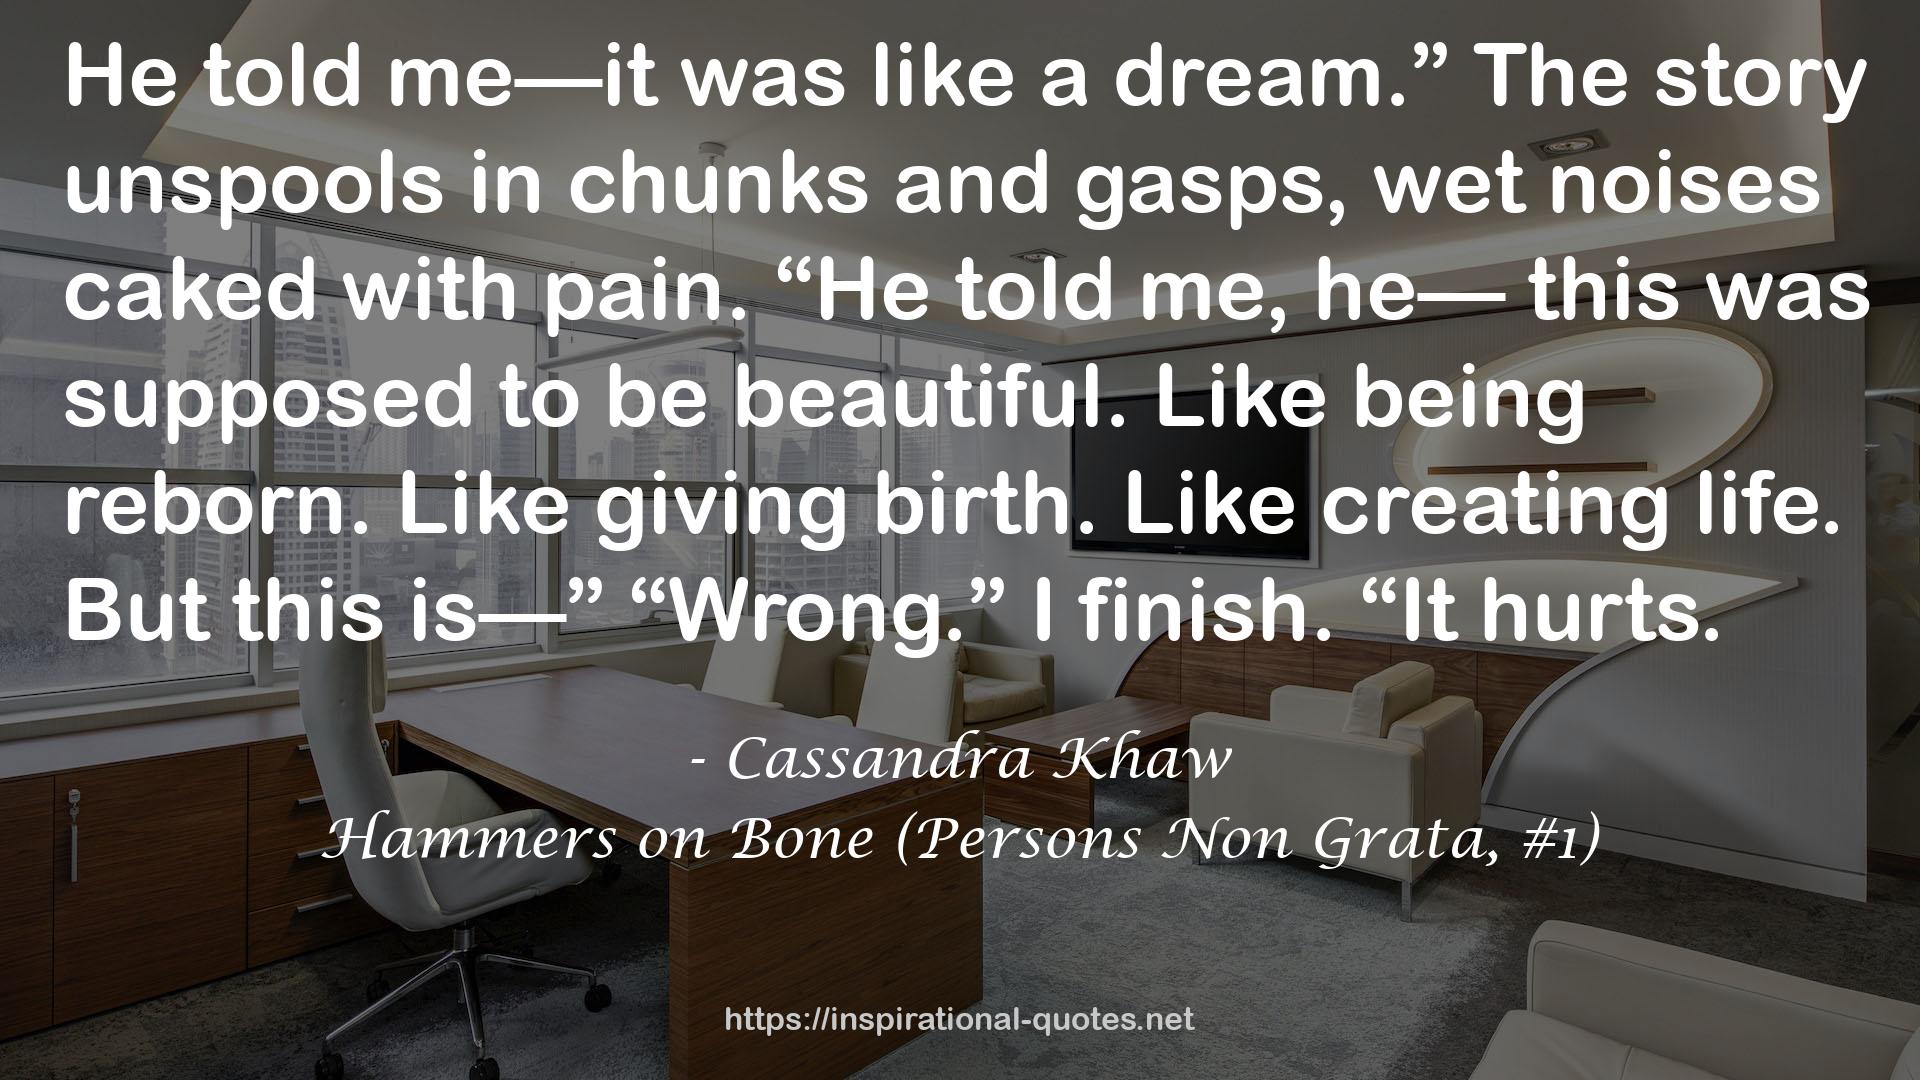 Hammers on Bone (Persons Non Grata, #1) QUOTES